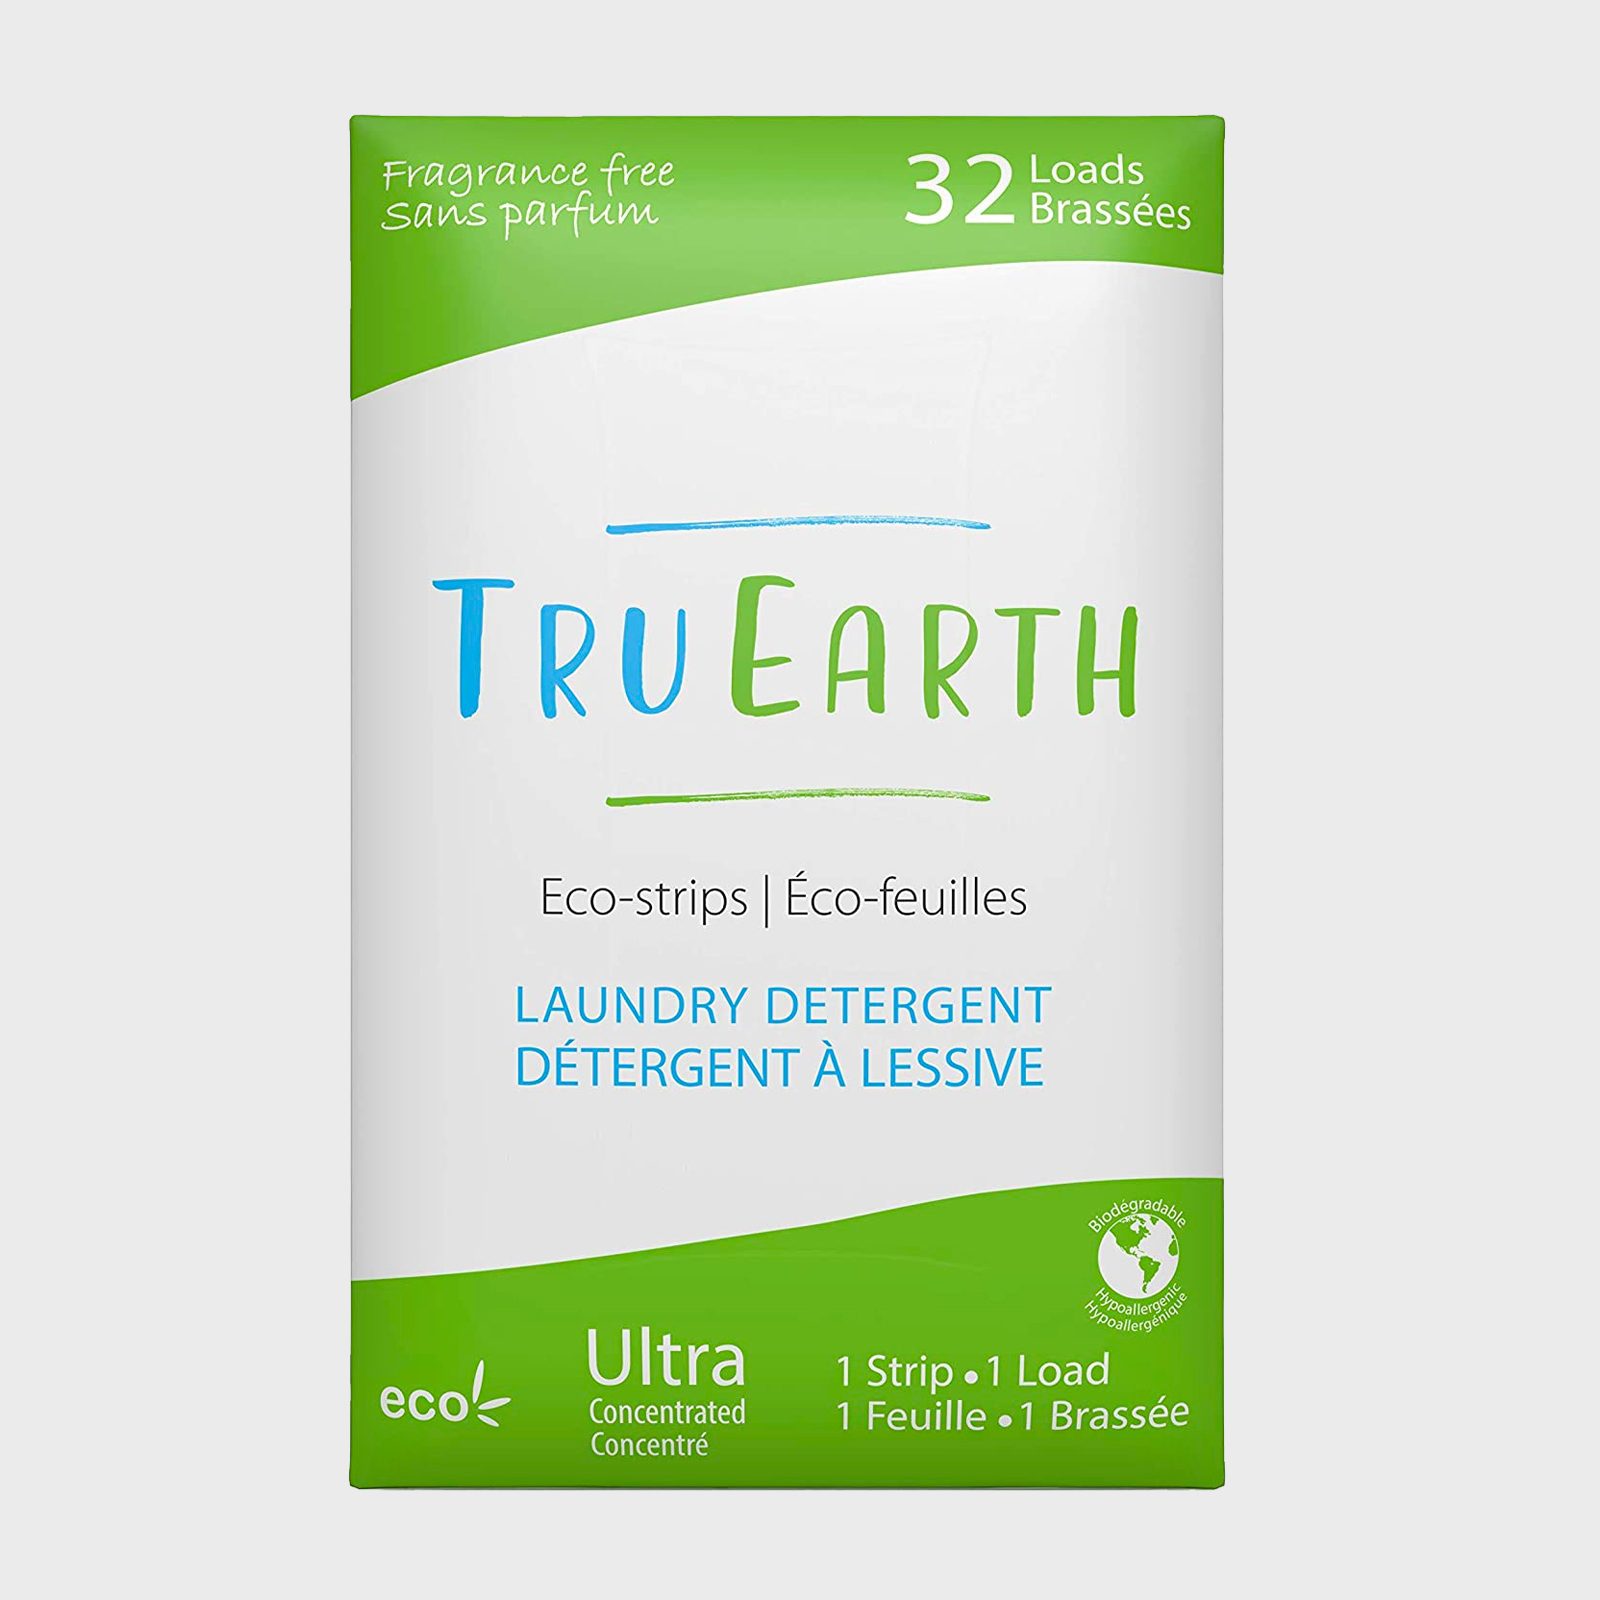 Rd 12 Eco Friendly Cleaning Products Ecomm Truearth Laundry Detergent Strips